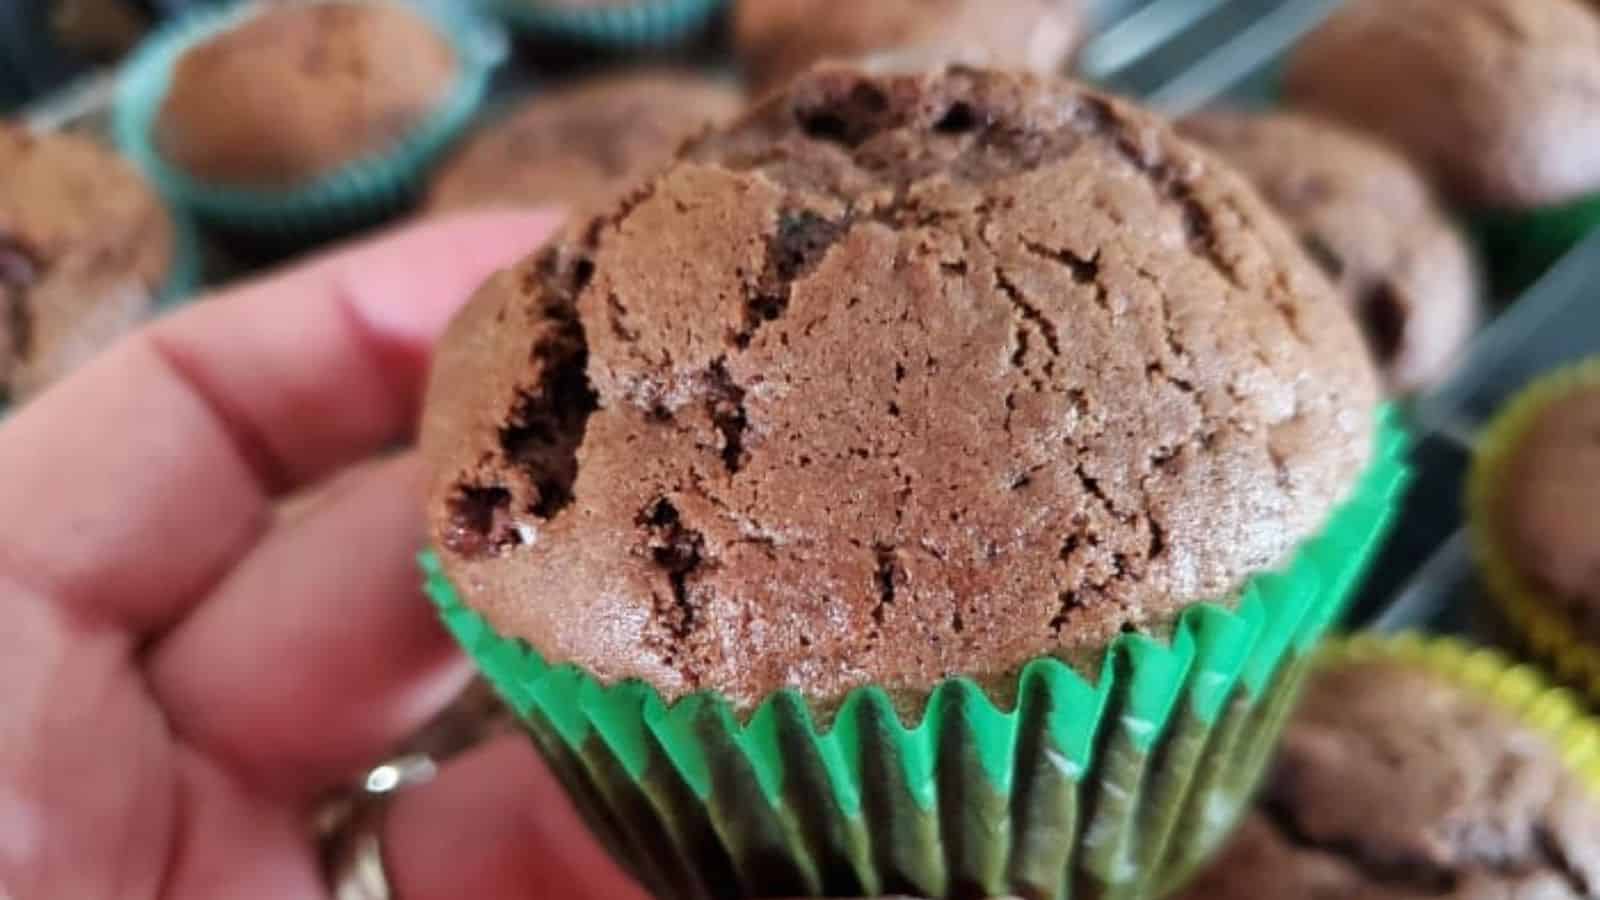 Image shows a hand holding a Double Chocolate Zucchini Muffin with more in the background.